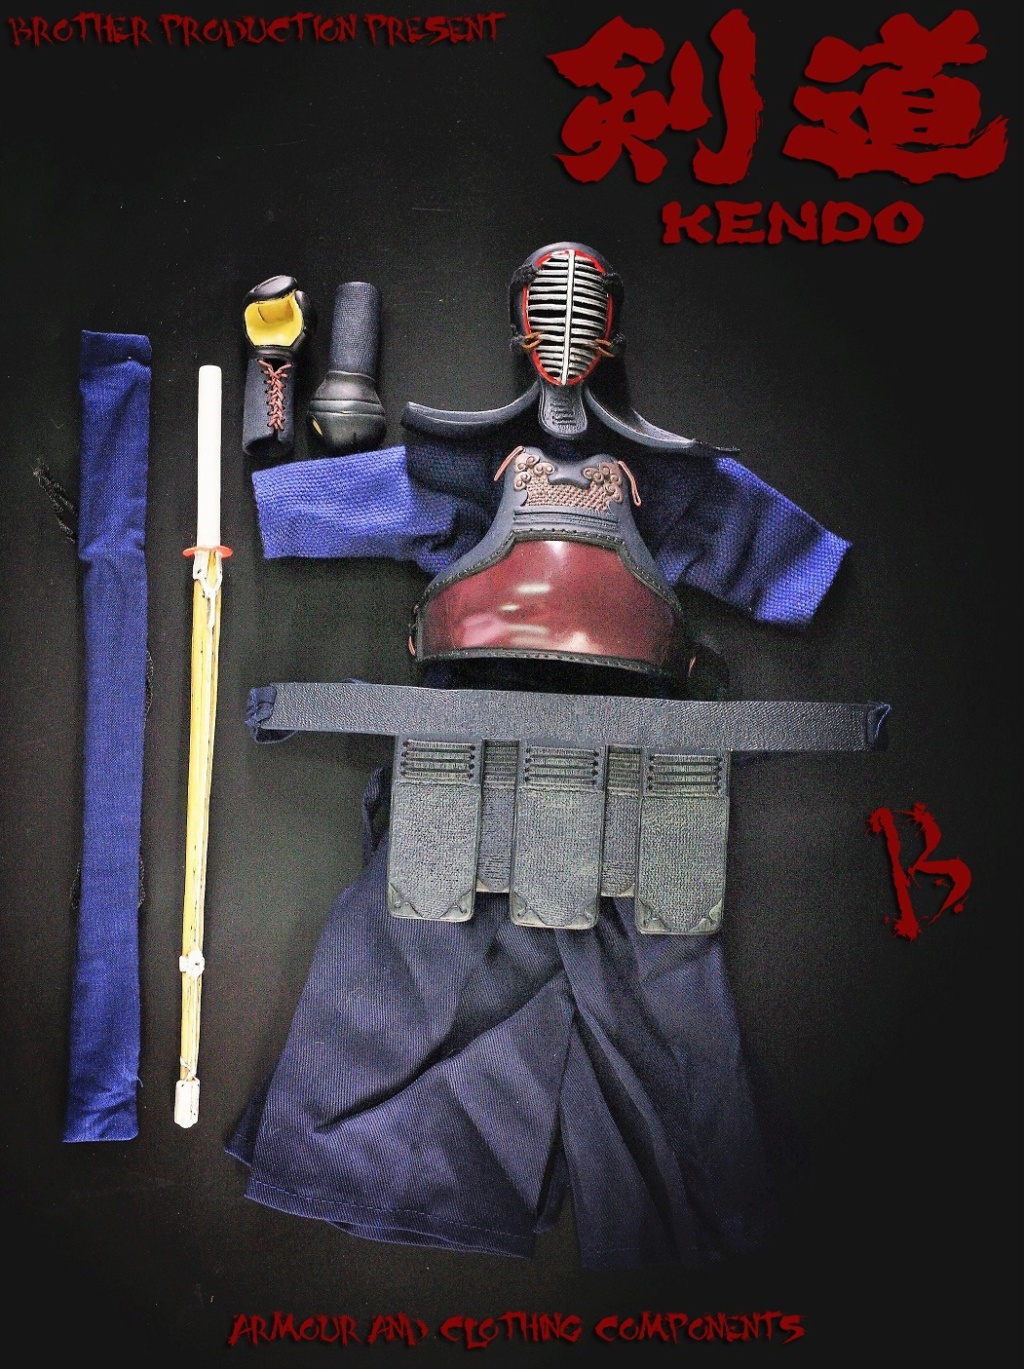 BrotherProduction - NEW PRODUCT: Brother Production: 1/6 Kendo - Armor Costume Set 15530010